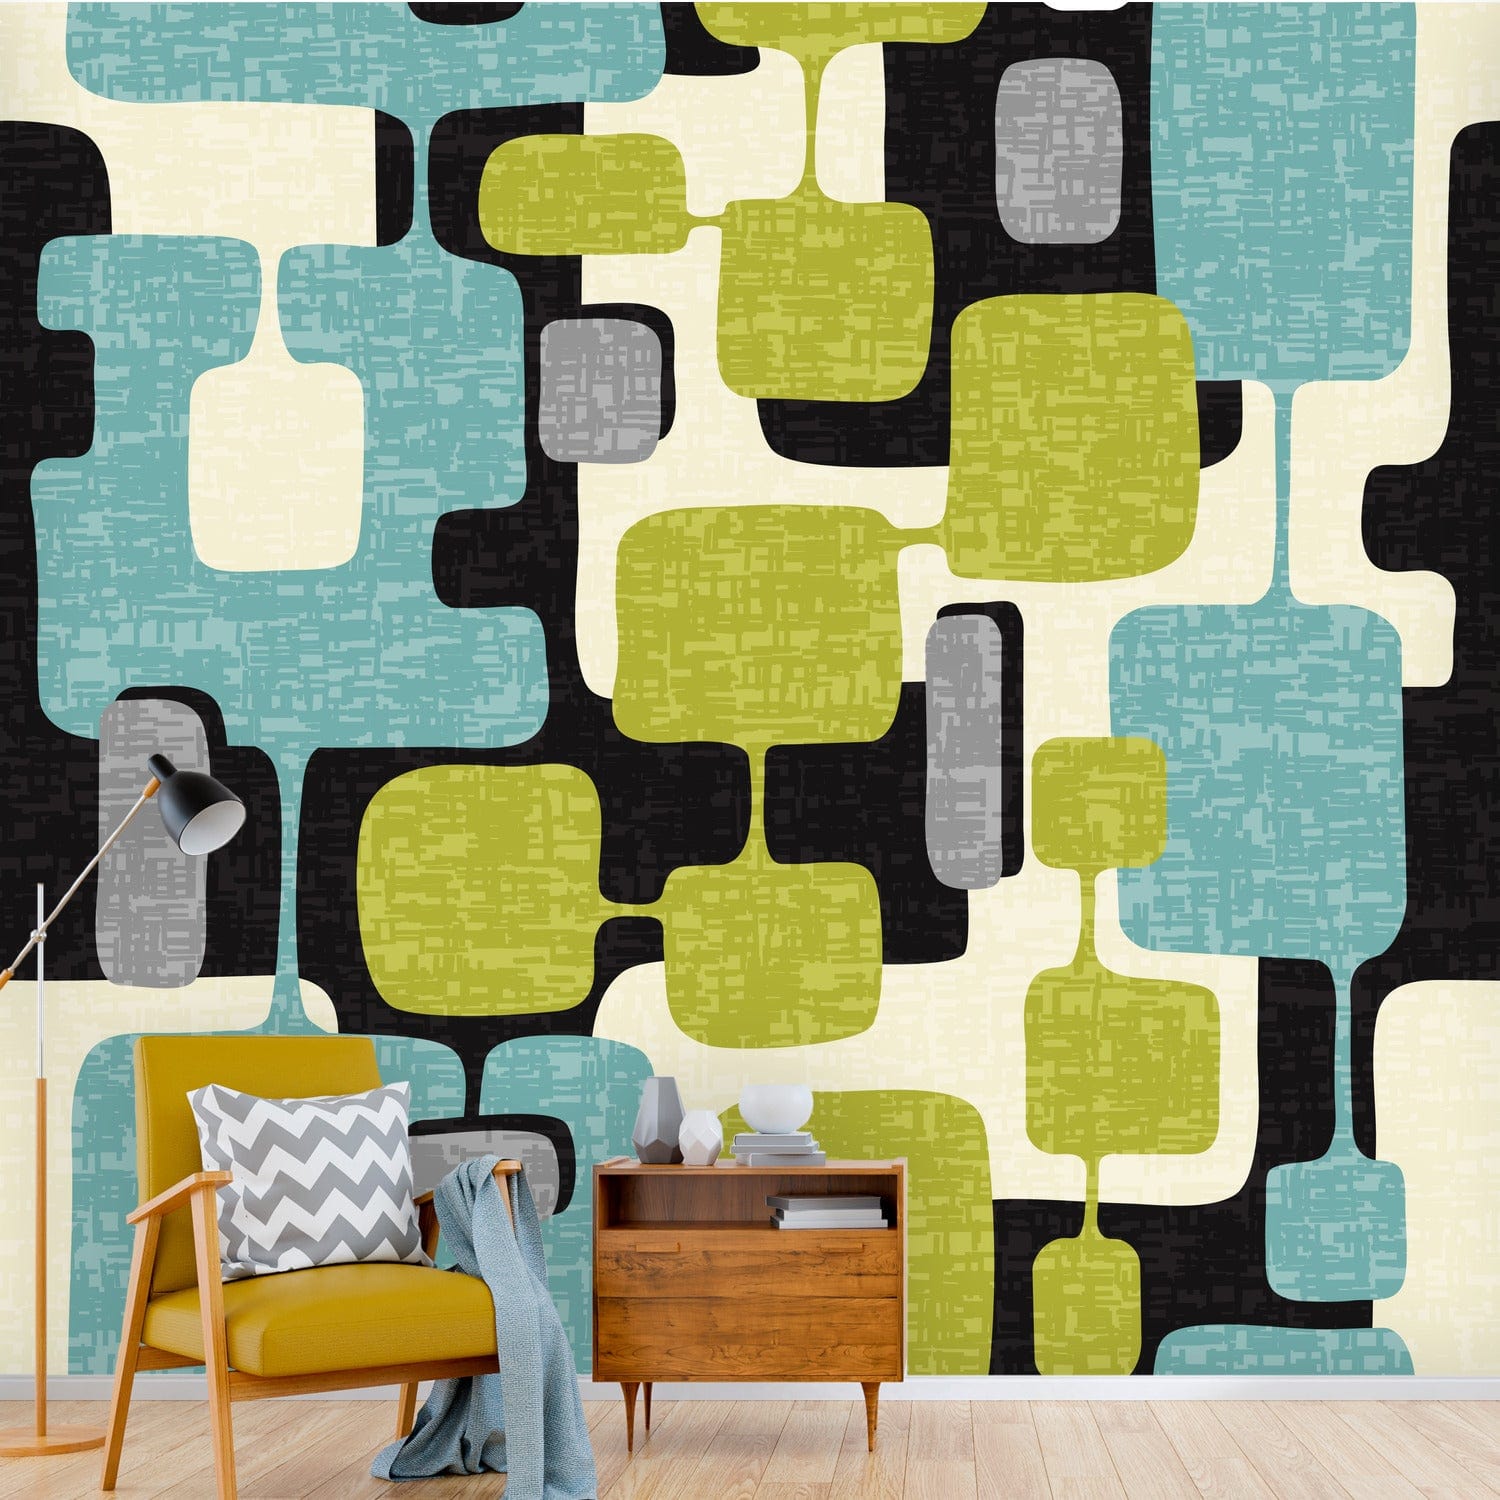 kate-mcenroe-nyc Wall Mural - Mid Century Modern Abstract, Retro Teal, Lime Green, Gray, Black MCM Wallpaper, Vintage Style Geometric Wall Covering Wall Mural H110 x W120 80729